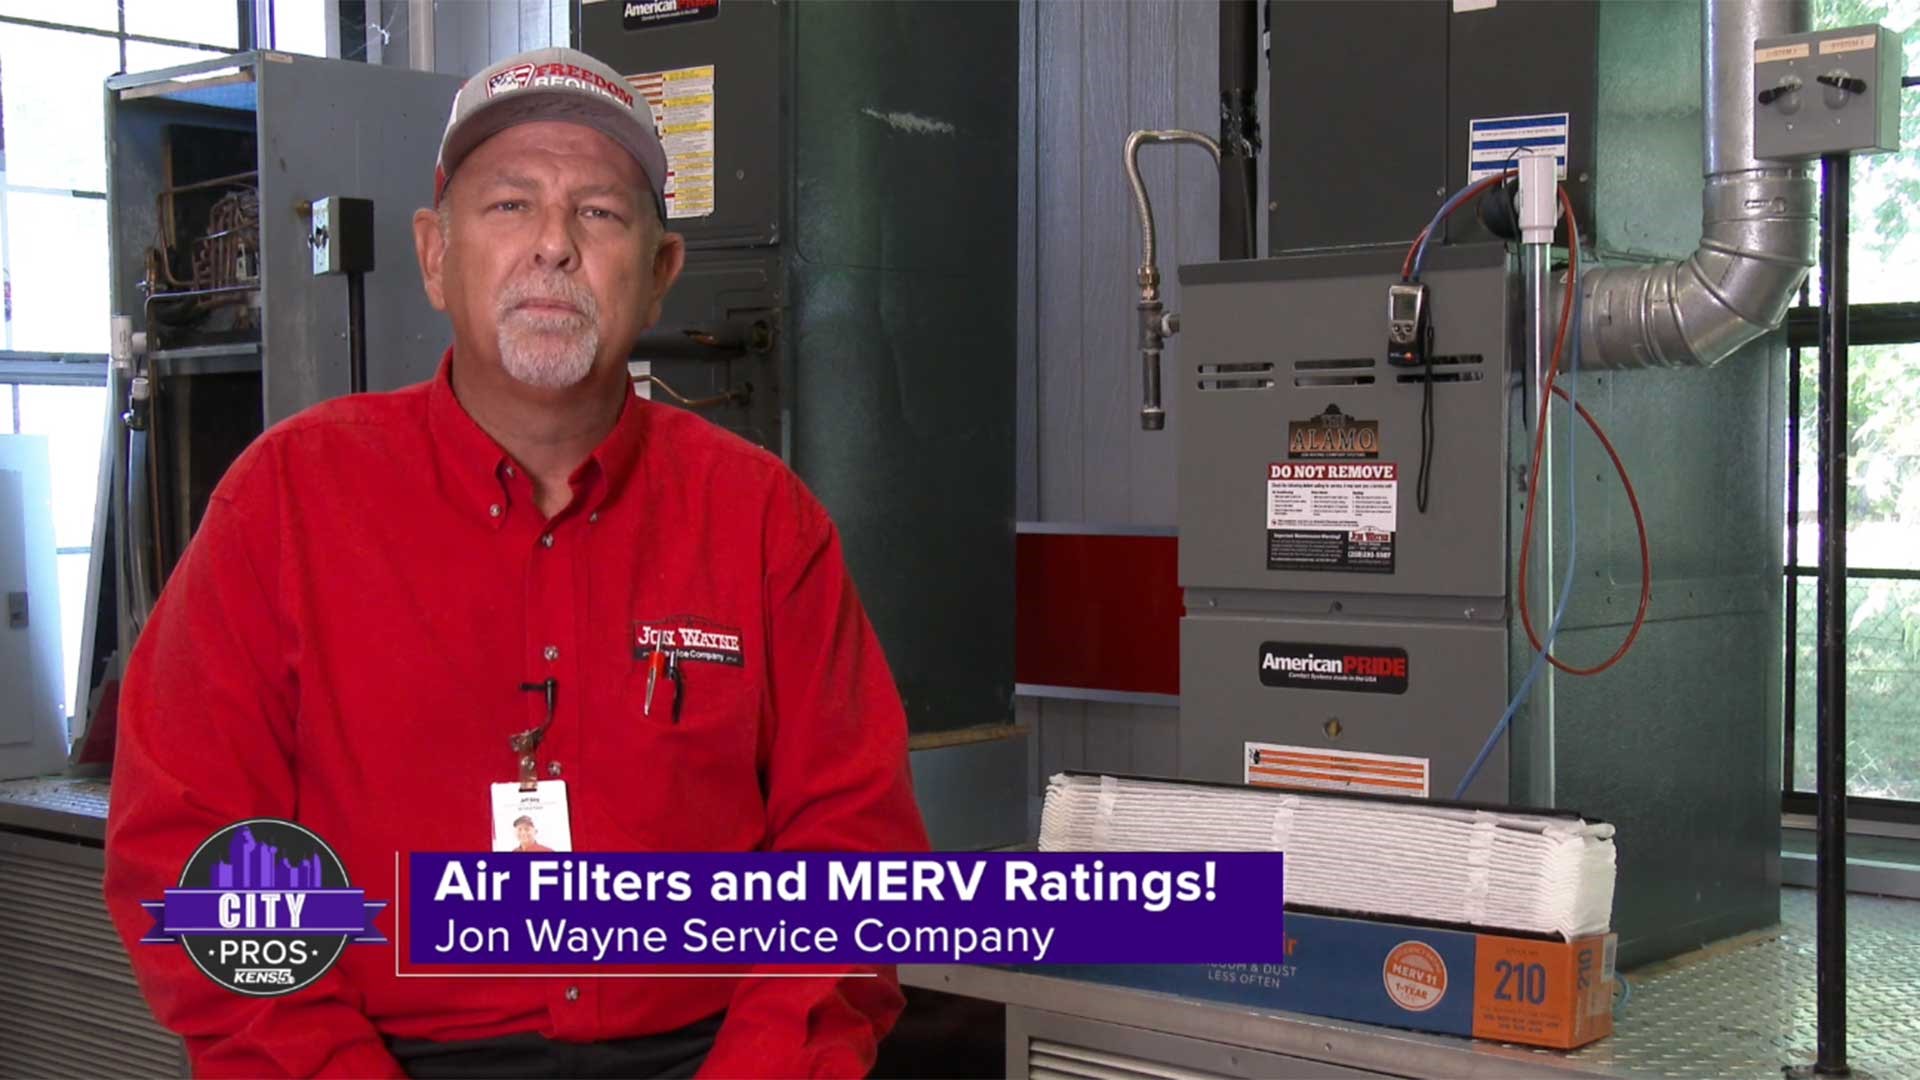 The Minimal Efficiency Reporting Value is the minimum amount of particles that your air filter will catch. Jon Wayne can help you use the right one for your system.